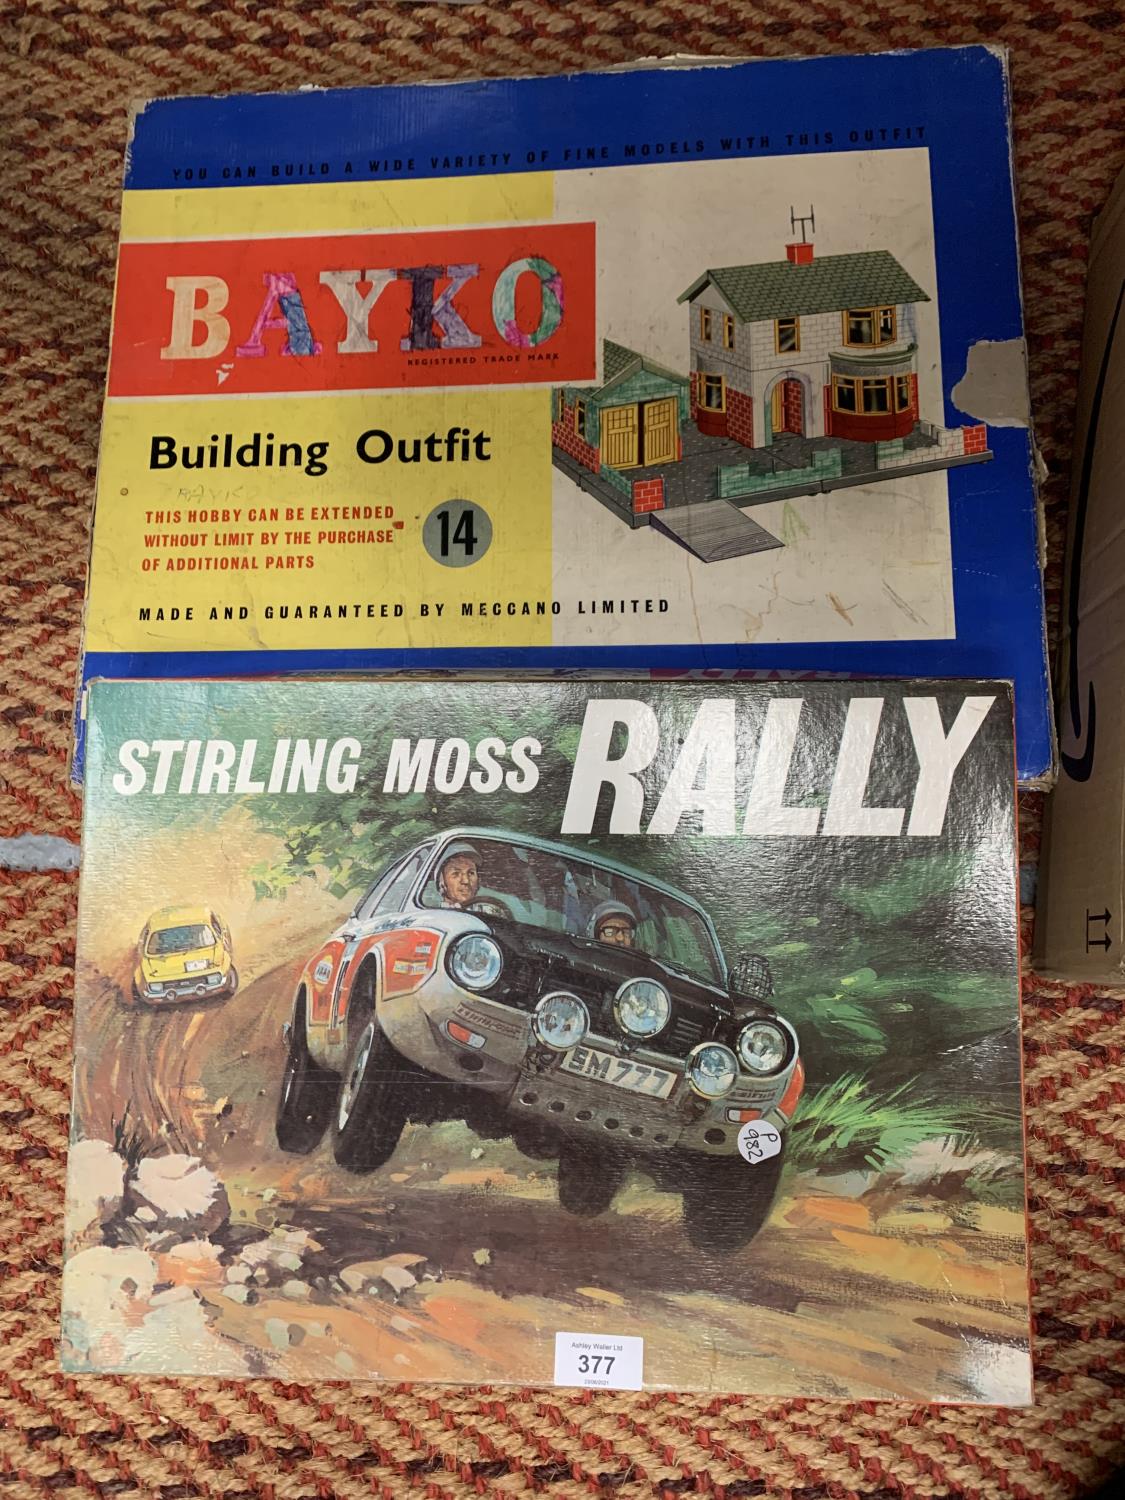 A VINTAGE BAYKO BUILDING OUTFIT MADE BY MECCANO , A STIRLING MOSS RALLY BOARD GAME